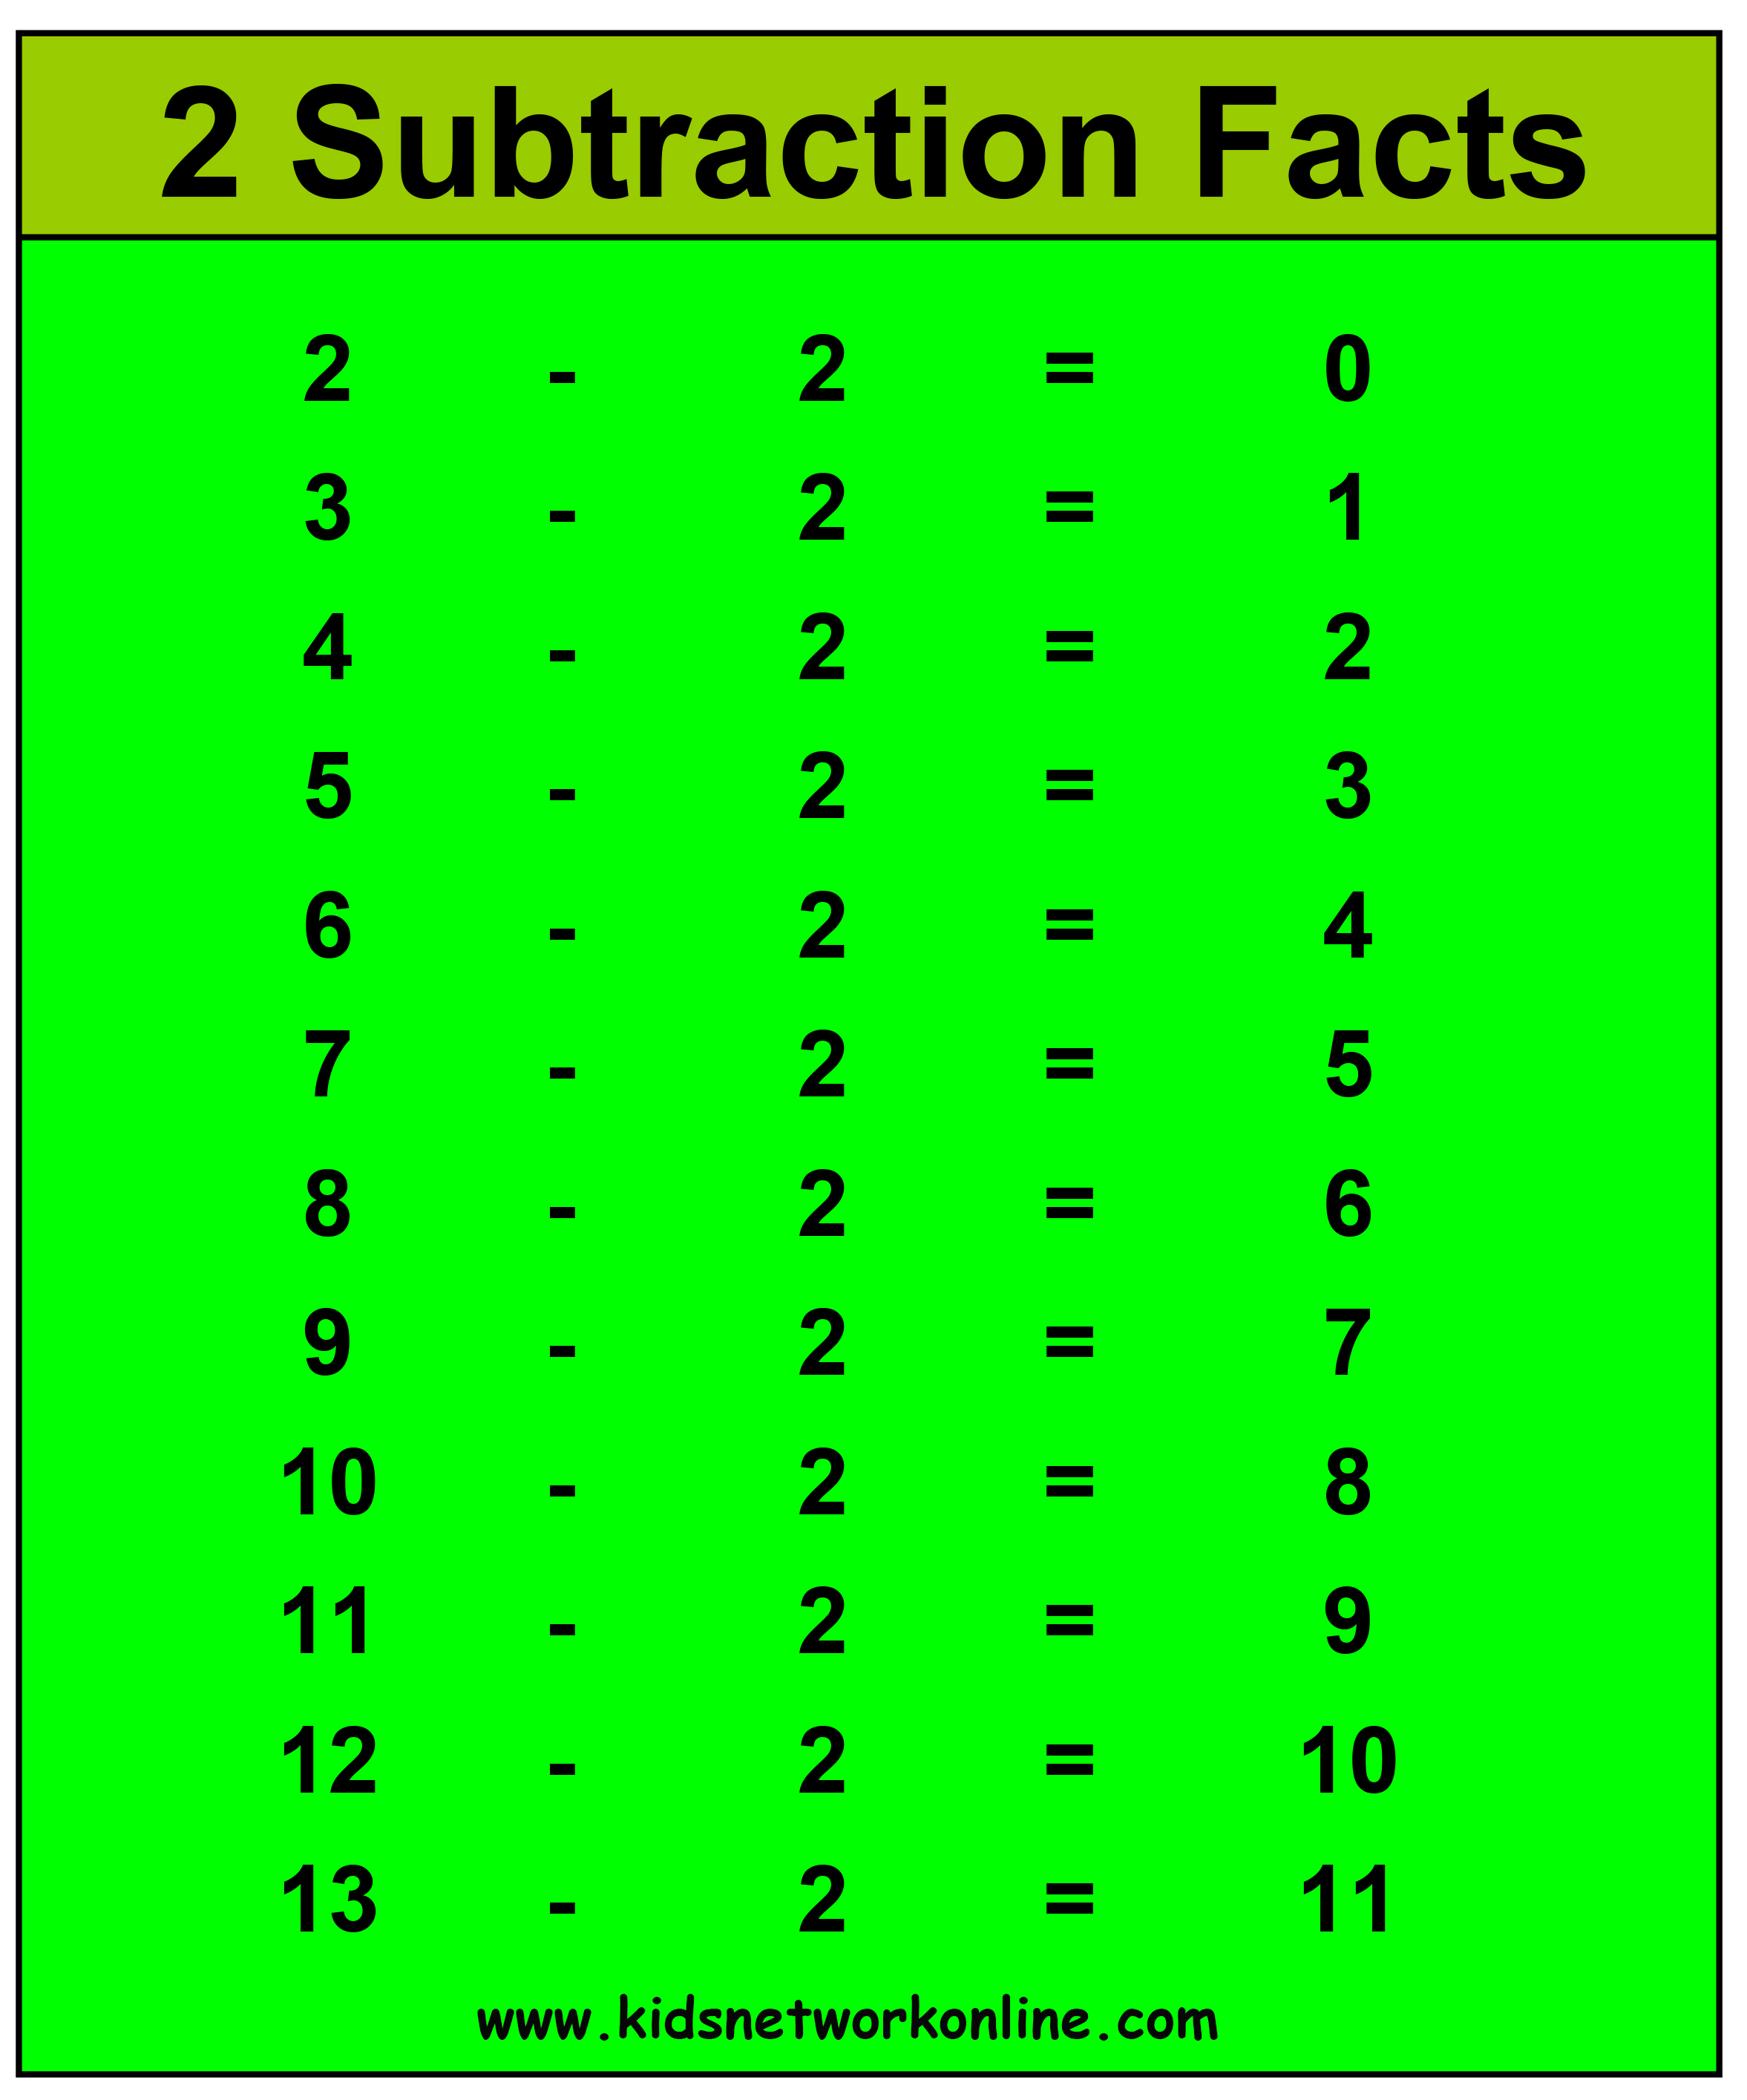 Subtraction-Flashcards